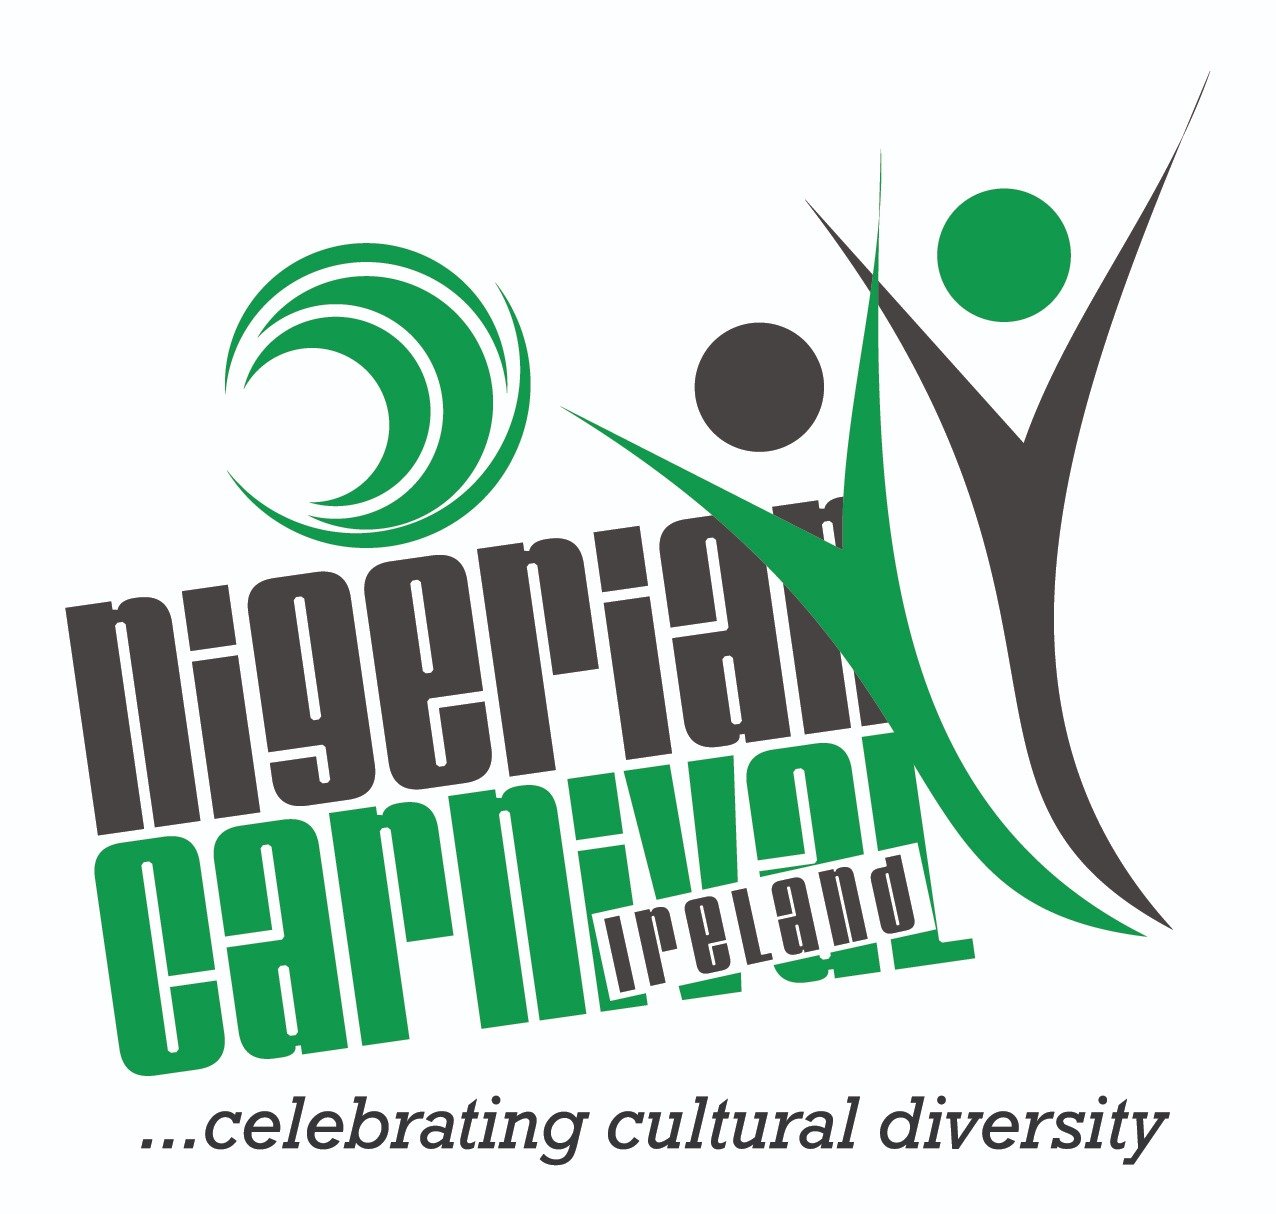 NIGERIAN CARNIVAL IRELAND
Workshops on, promotes & celebrates Diversity & Inclusion, educates on CULTURE,  re-orientates to defeat negative stereotyping.